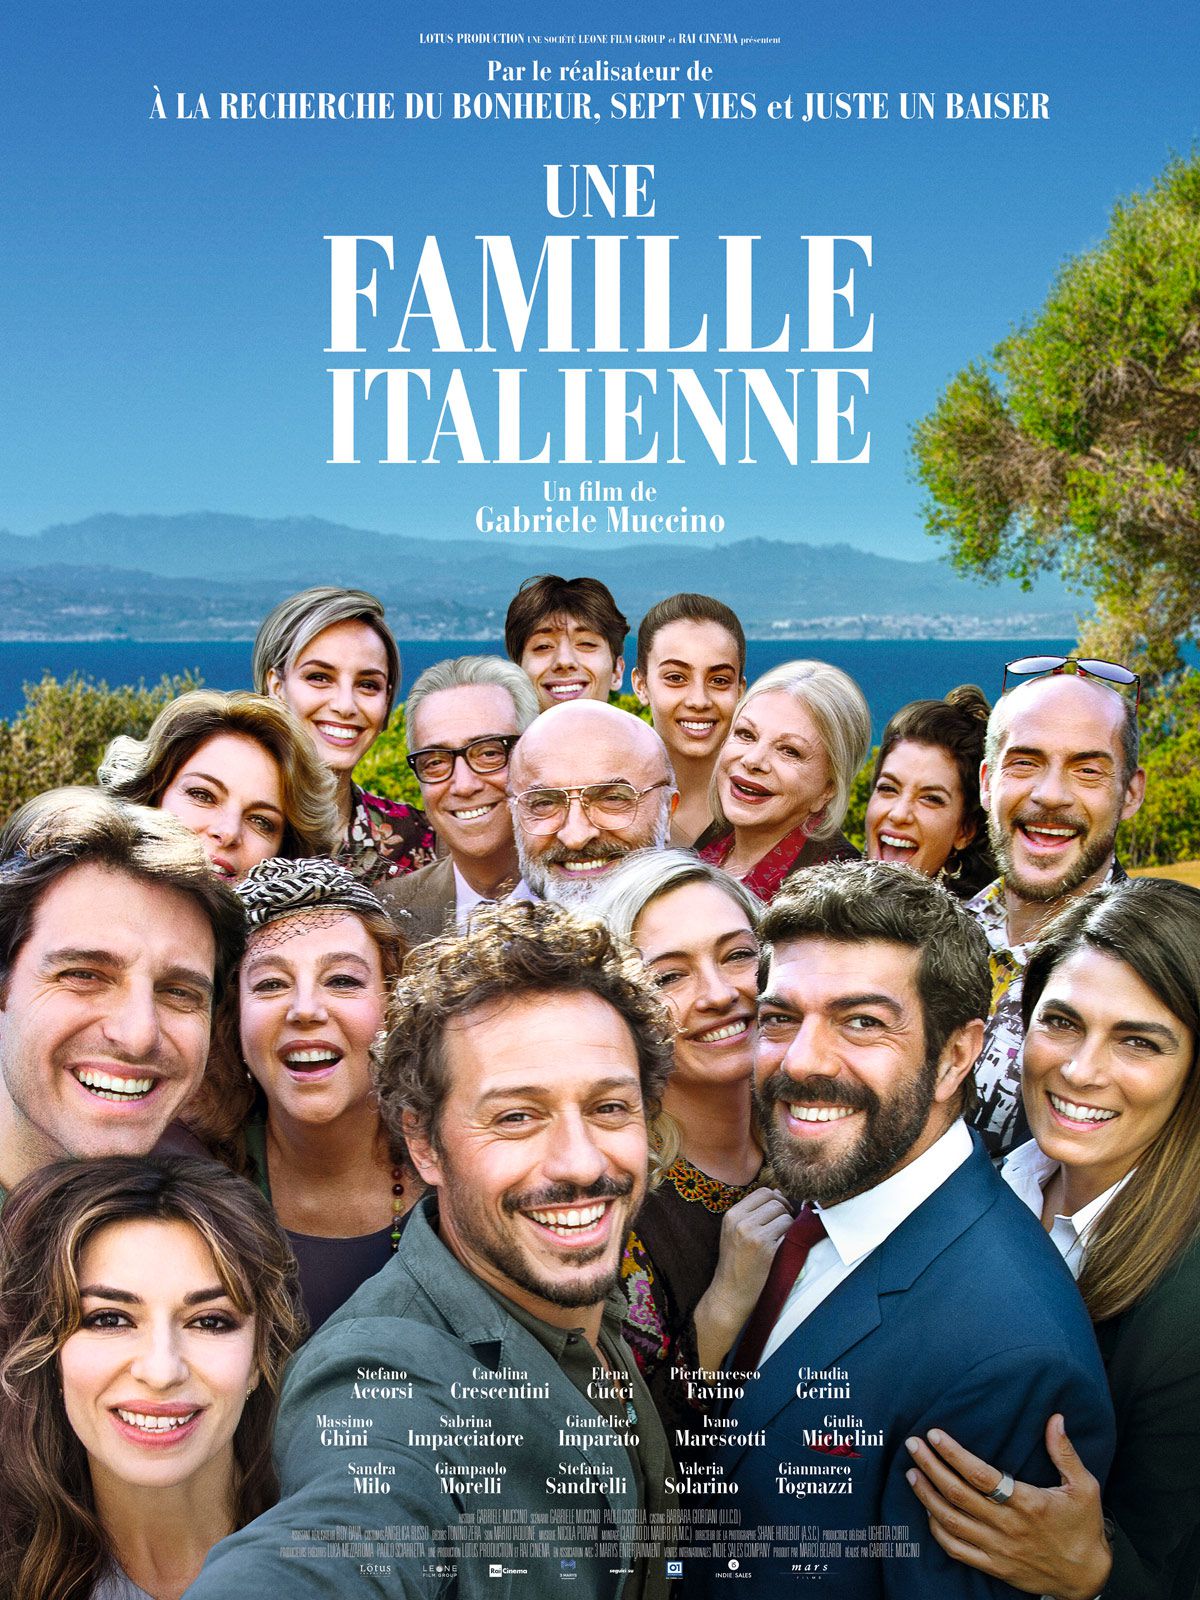 Une famille italienne - Film (2018) streaming VF gratuit complet